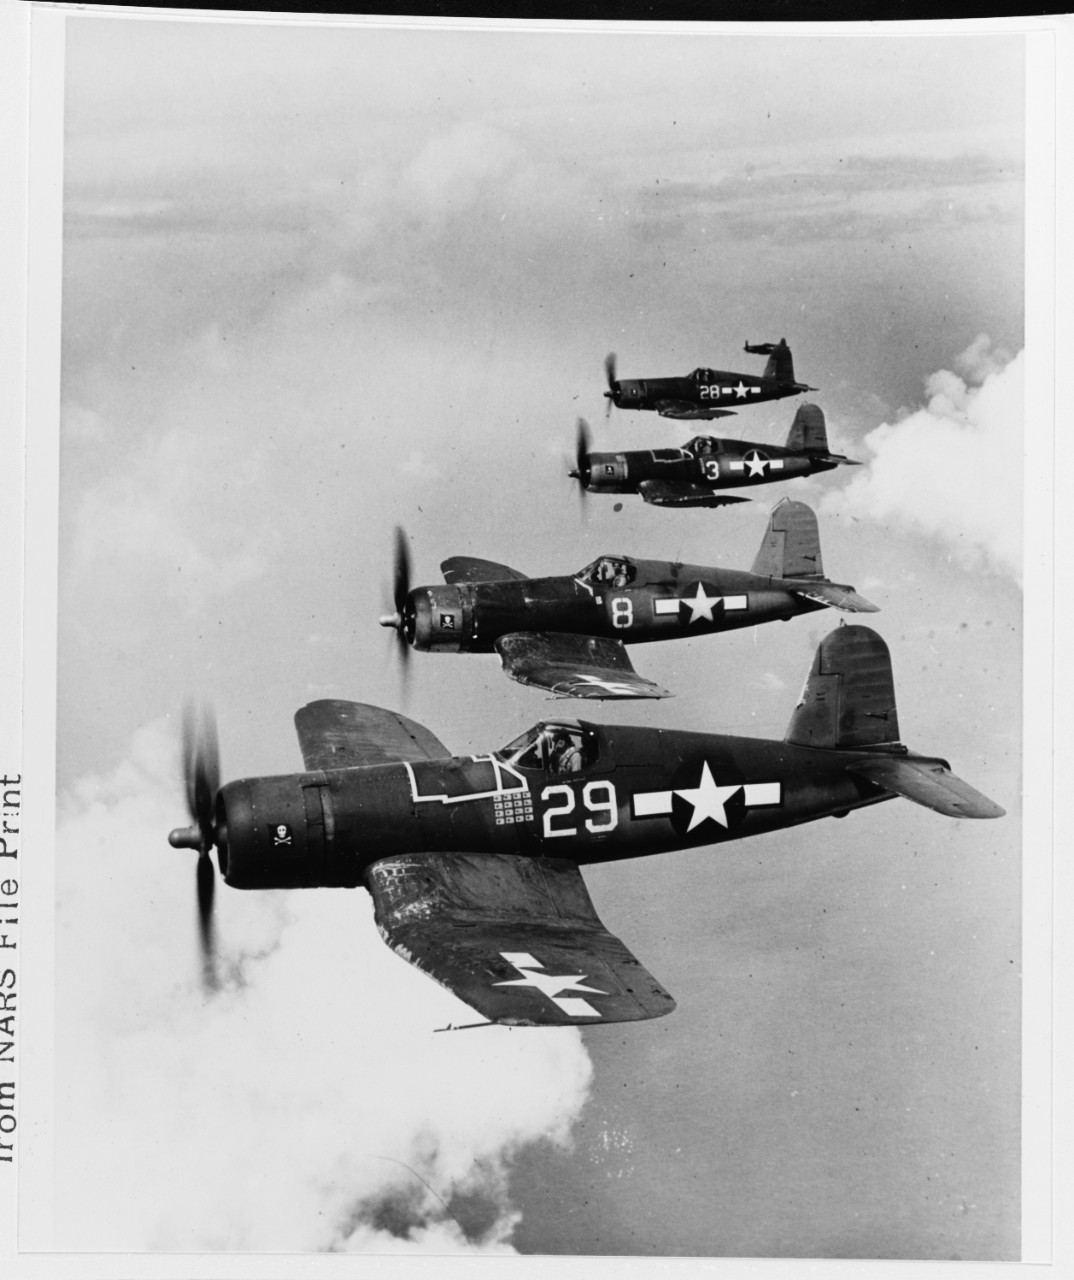 Vought F4U-1A "Corsair" fighters, of VF-17